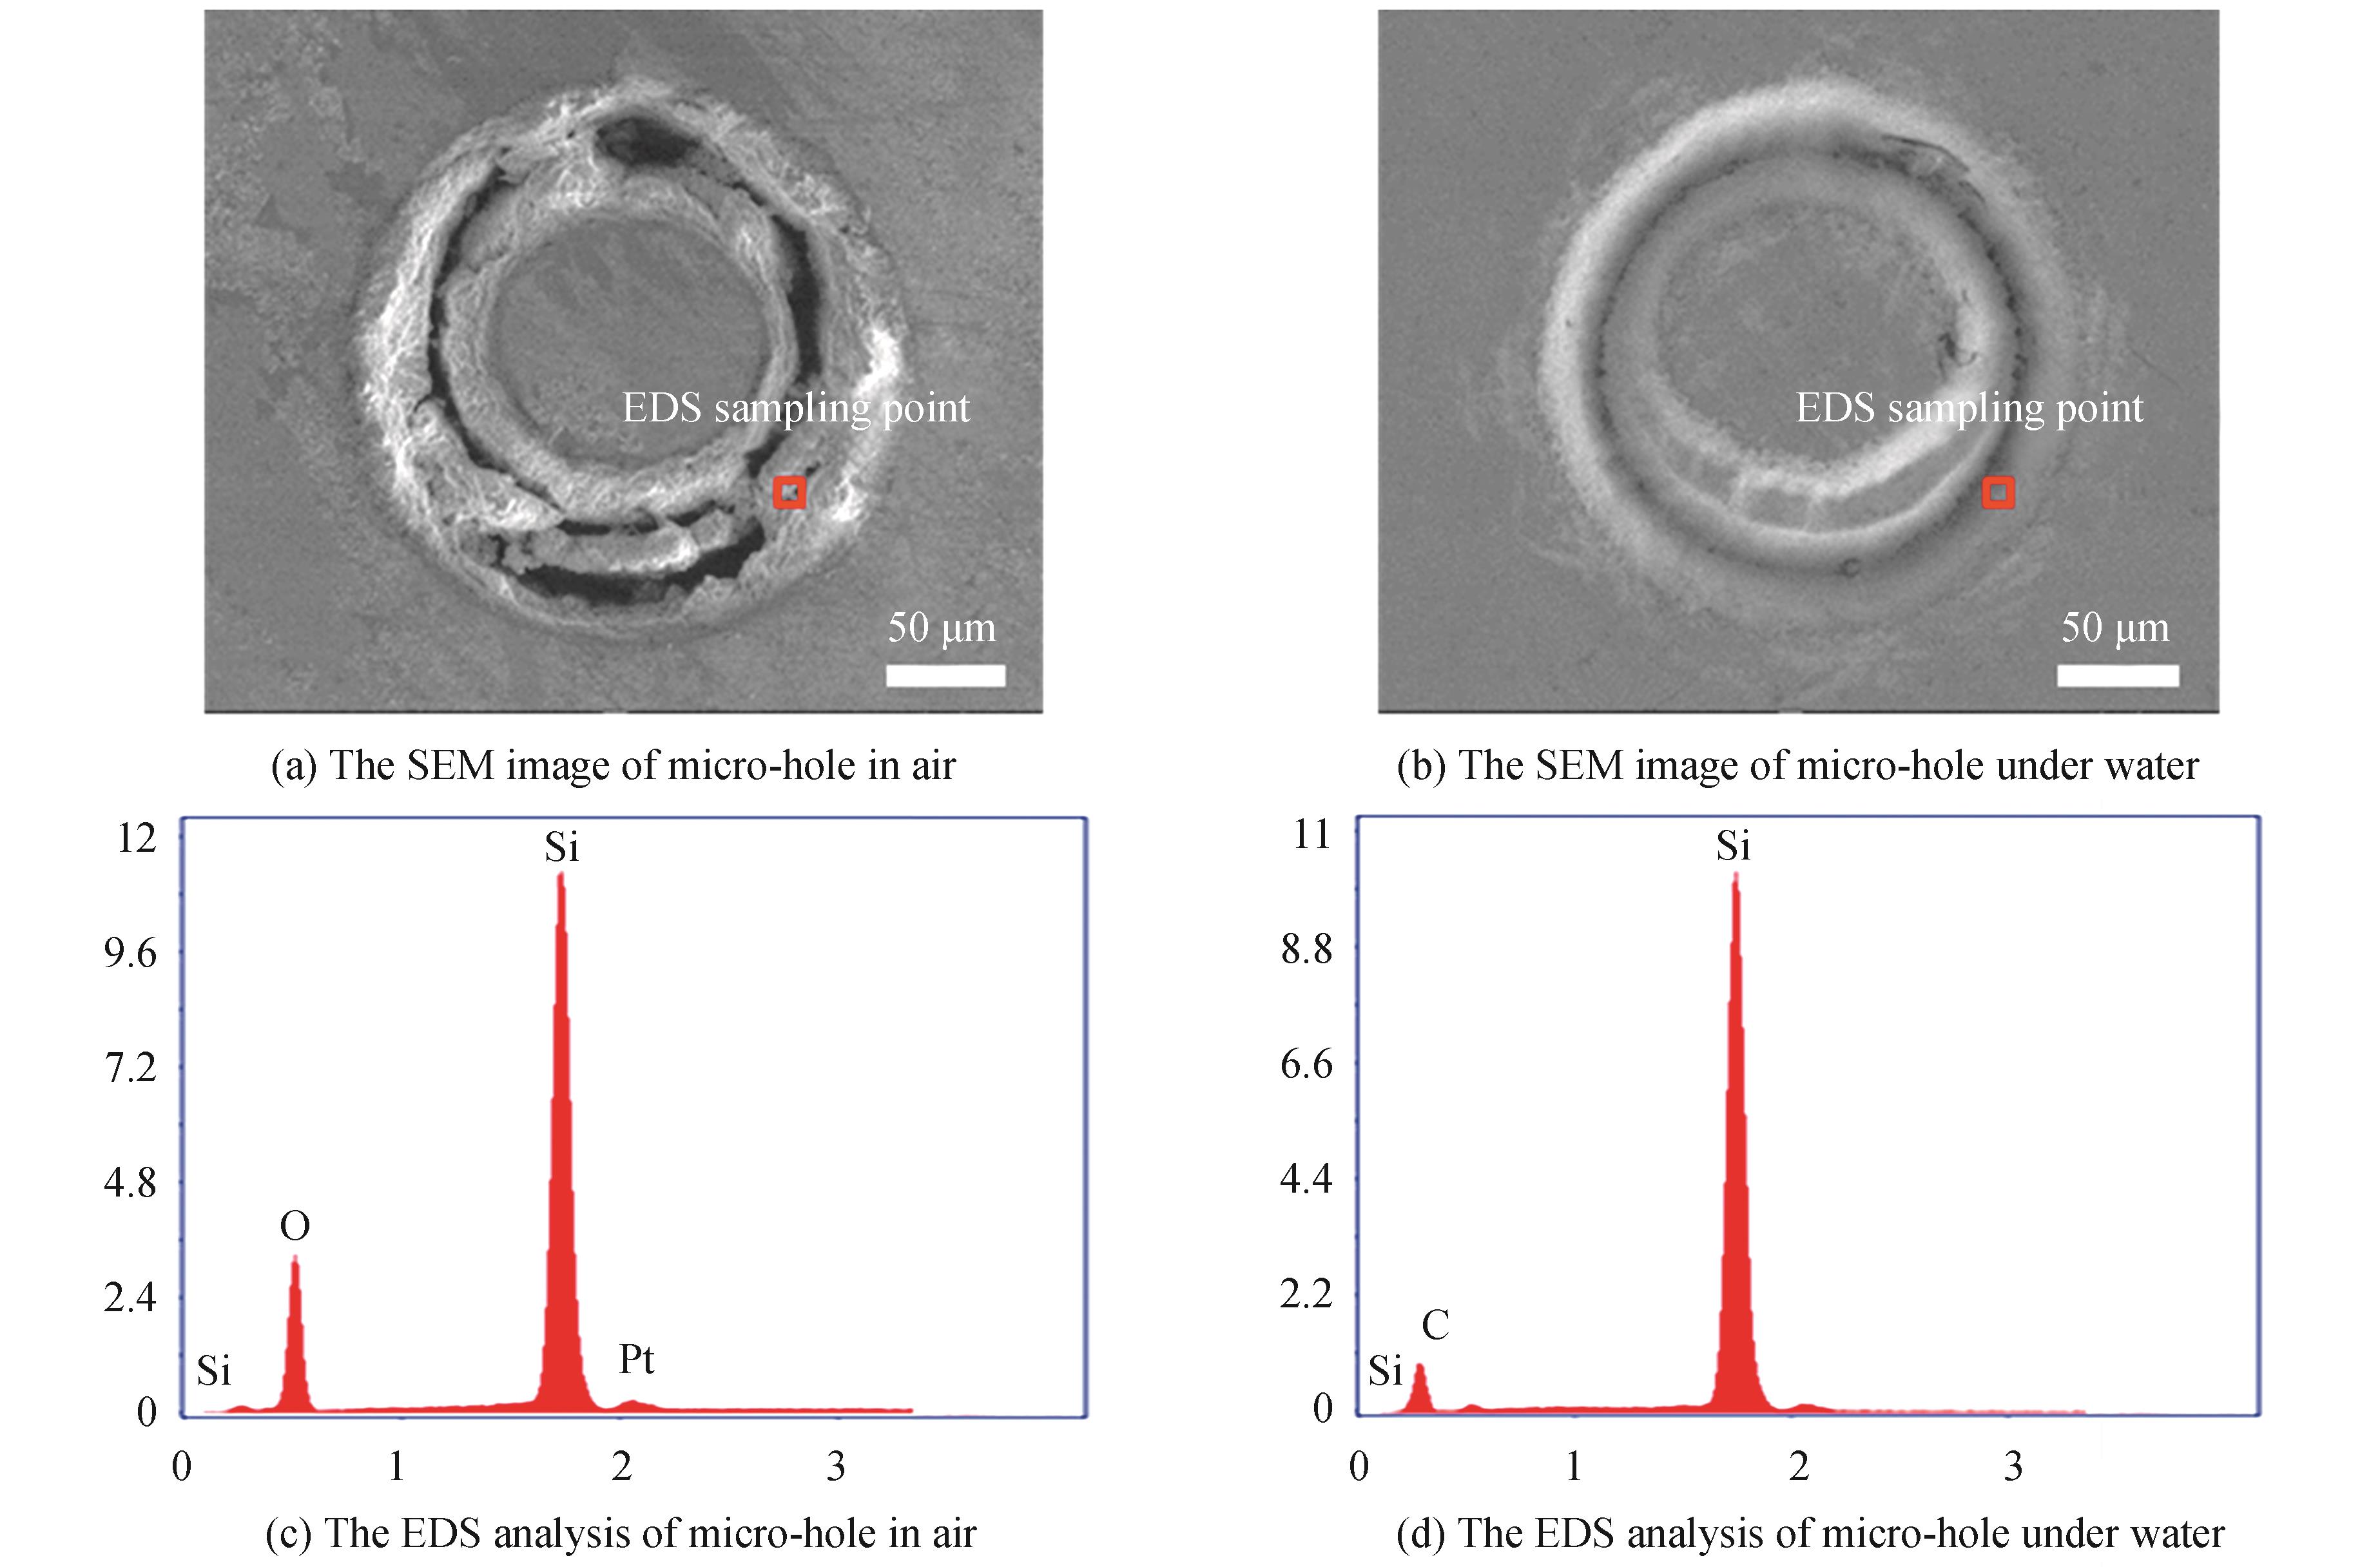 The SEM image and EDS analysis of micro-hole